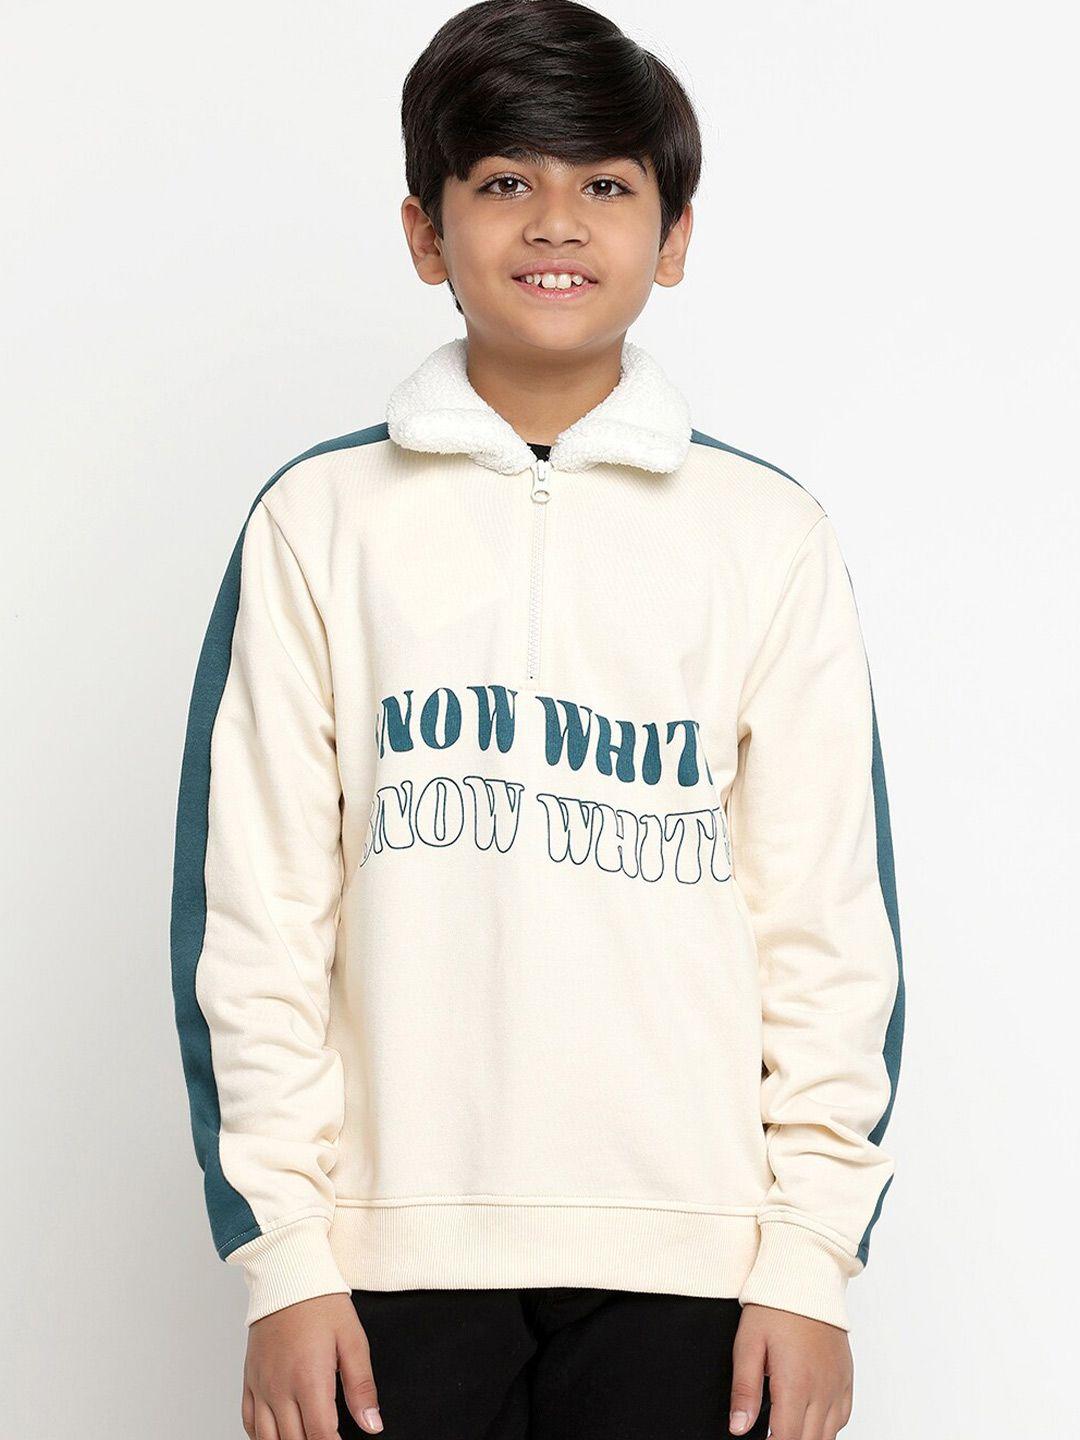 lil-tomatoes-boys-typography-printed-pullover